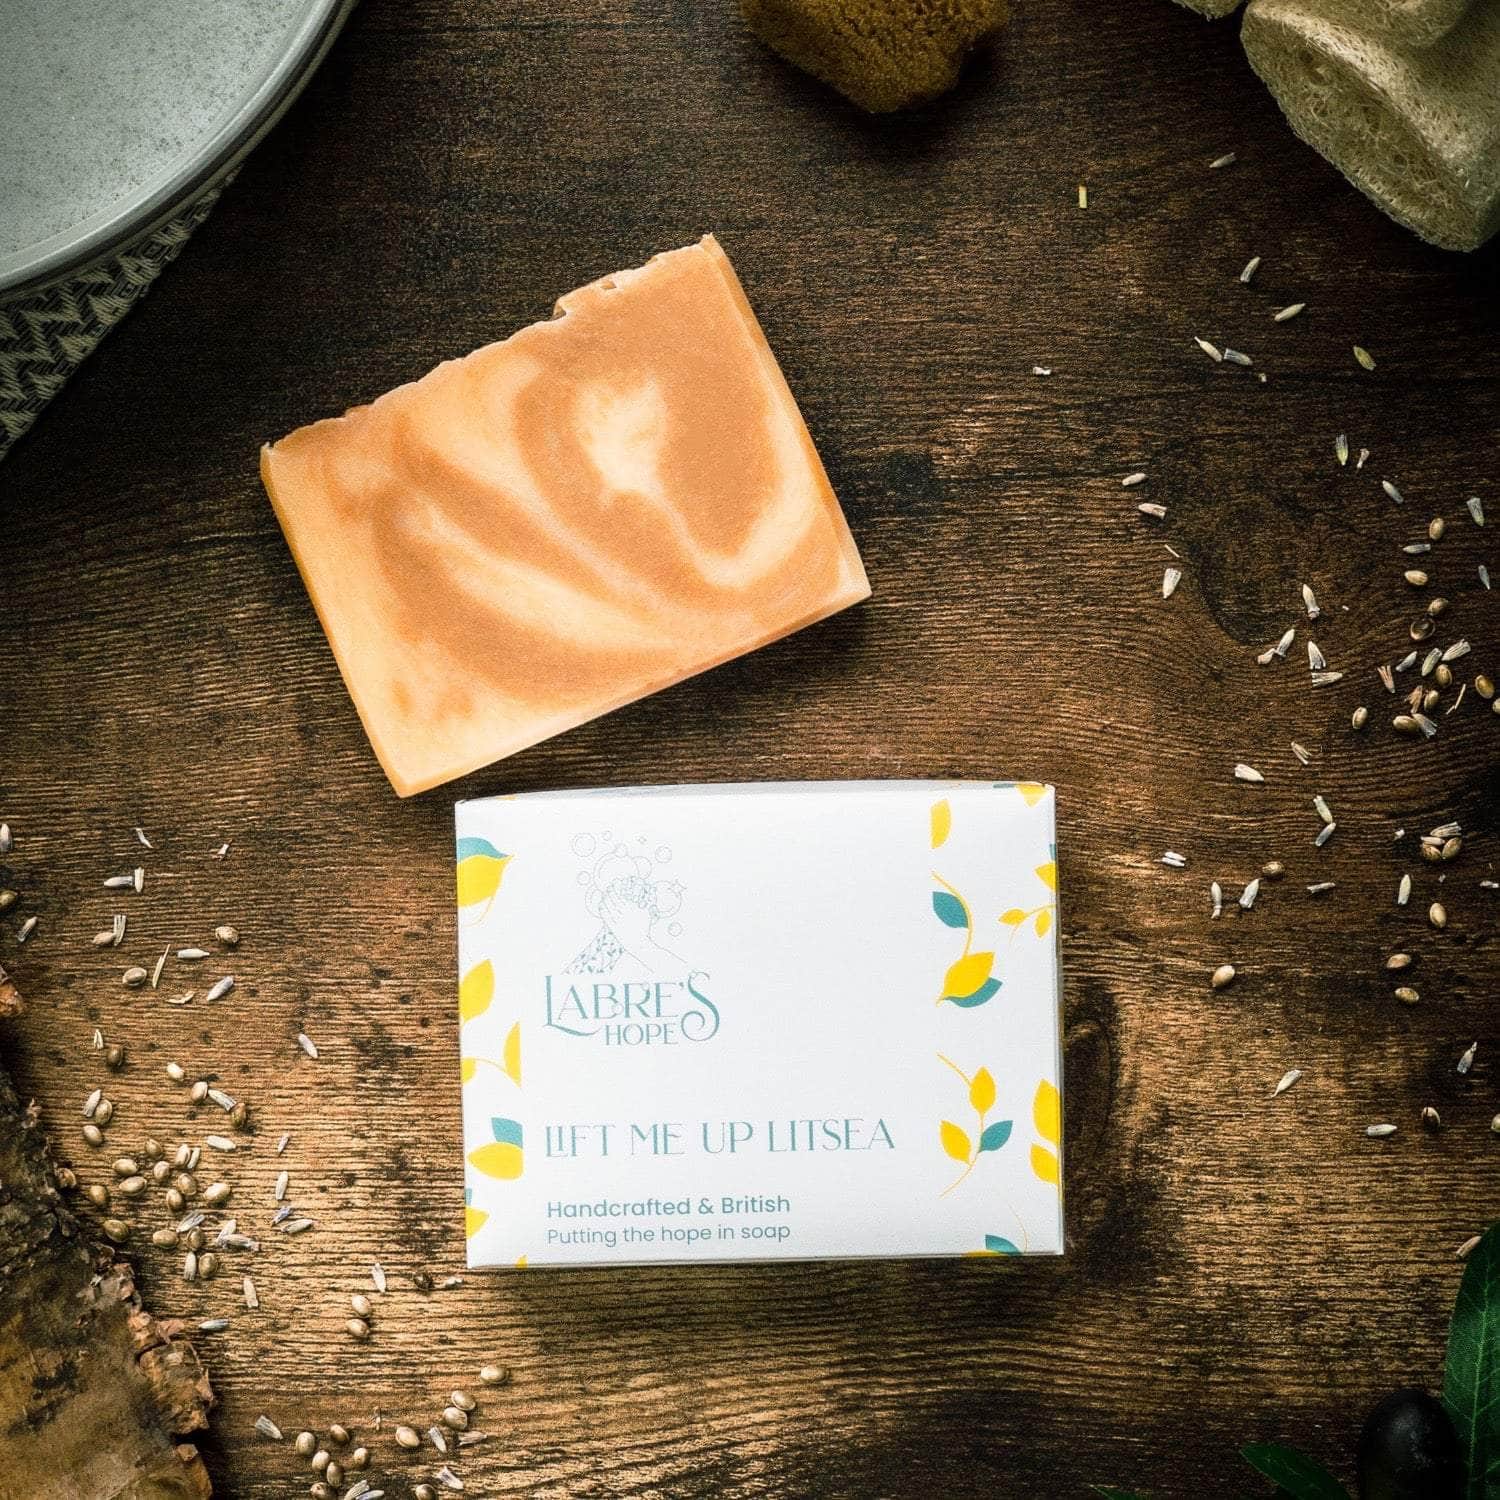 Labre's Hope Luxurious Handcrafted Soaps